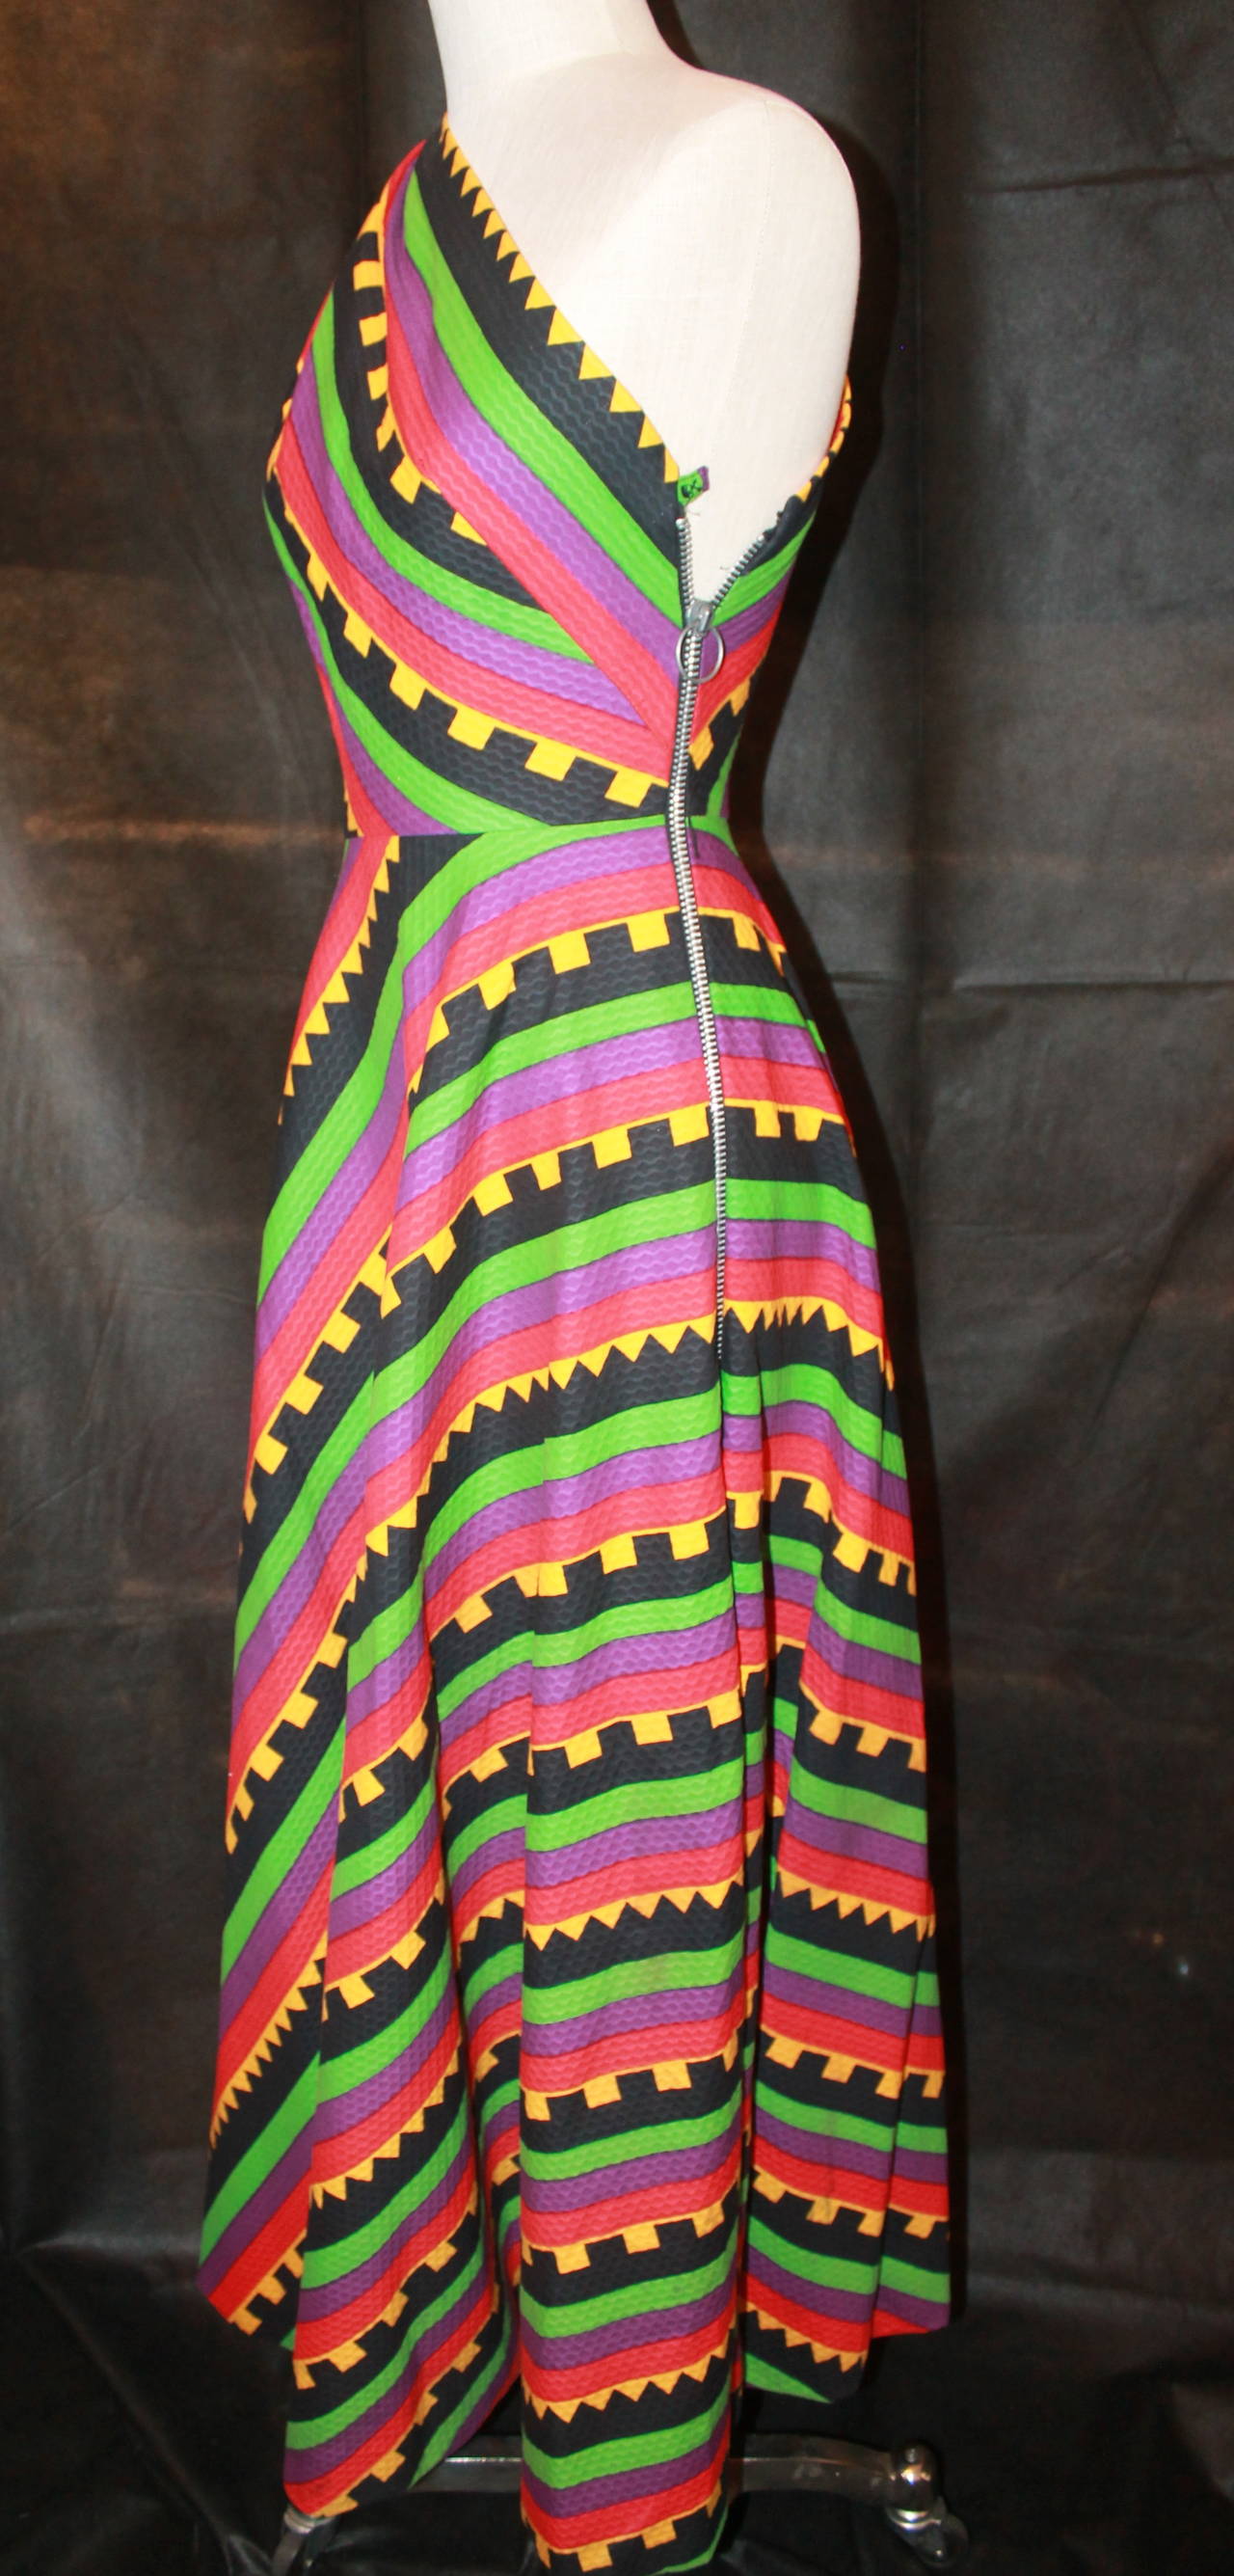 Sex & The City Lanvin Vintage Multi Color One-Shoulder Dress - circa 1980s - S. This dress is in excellent condition with no visible markings. It is truly a one of a kind piece.
**This dress is the same style as the one worn in the first Sex and